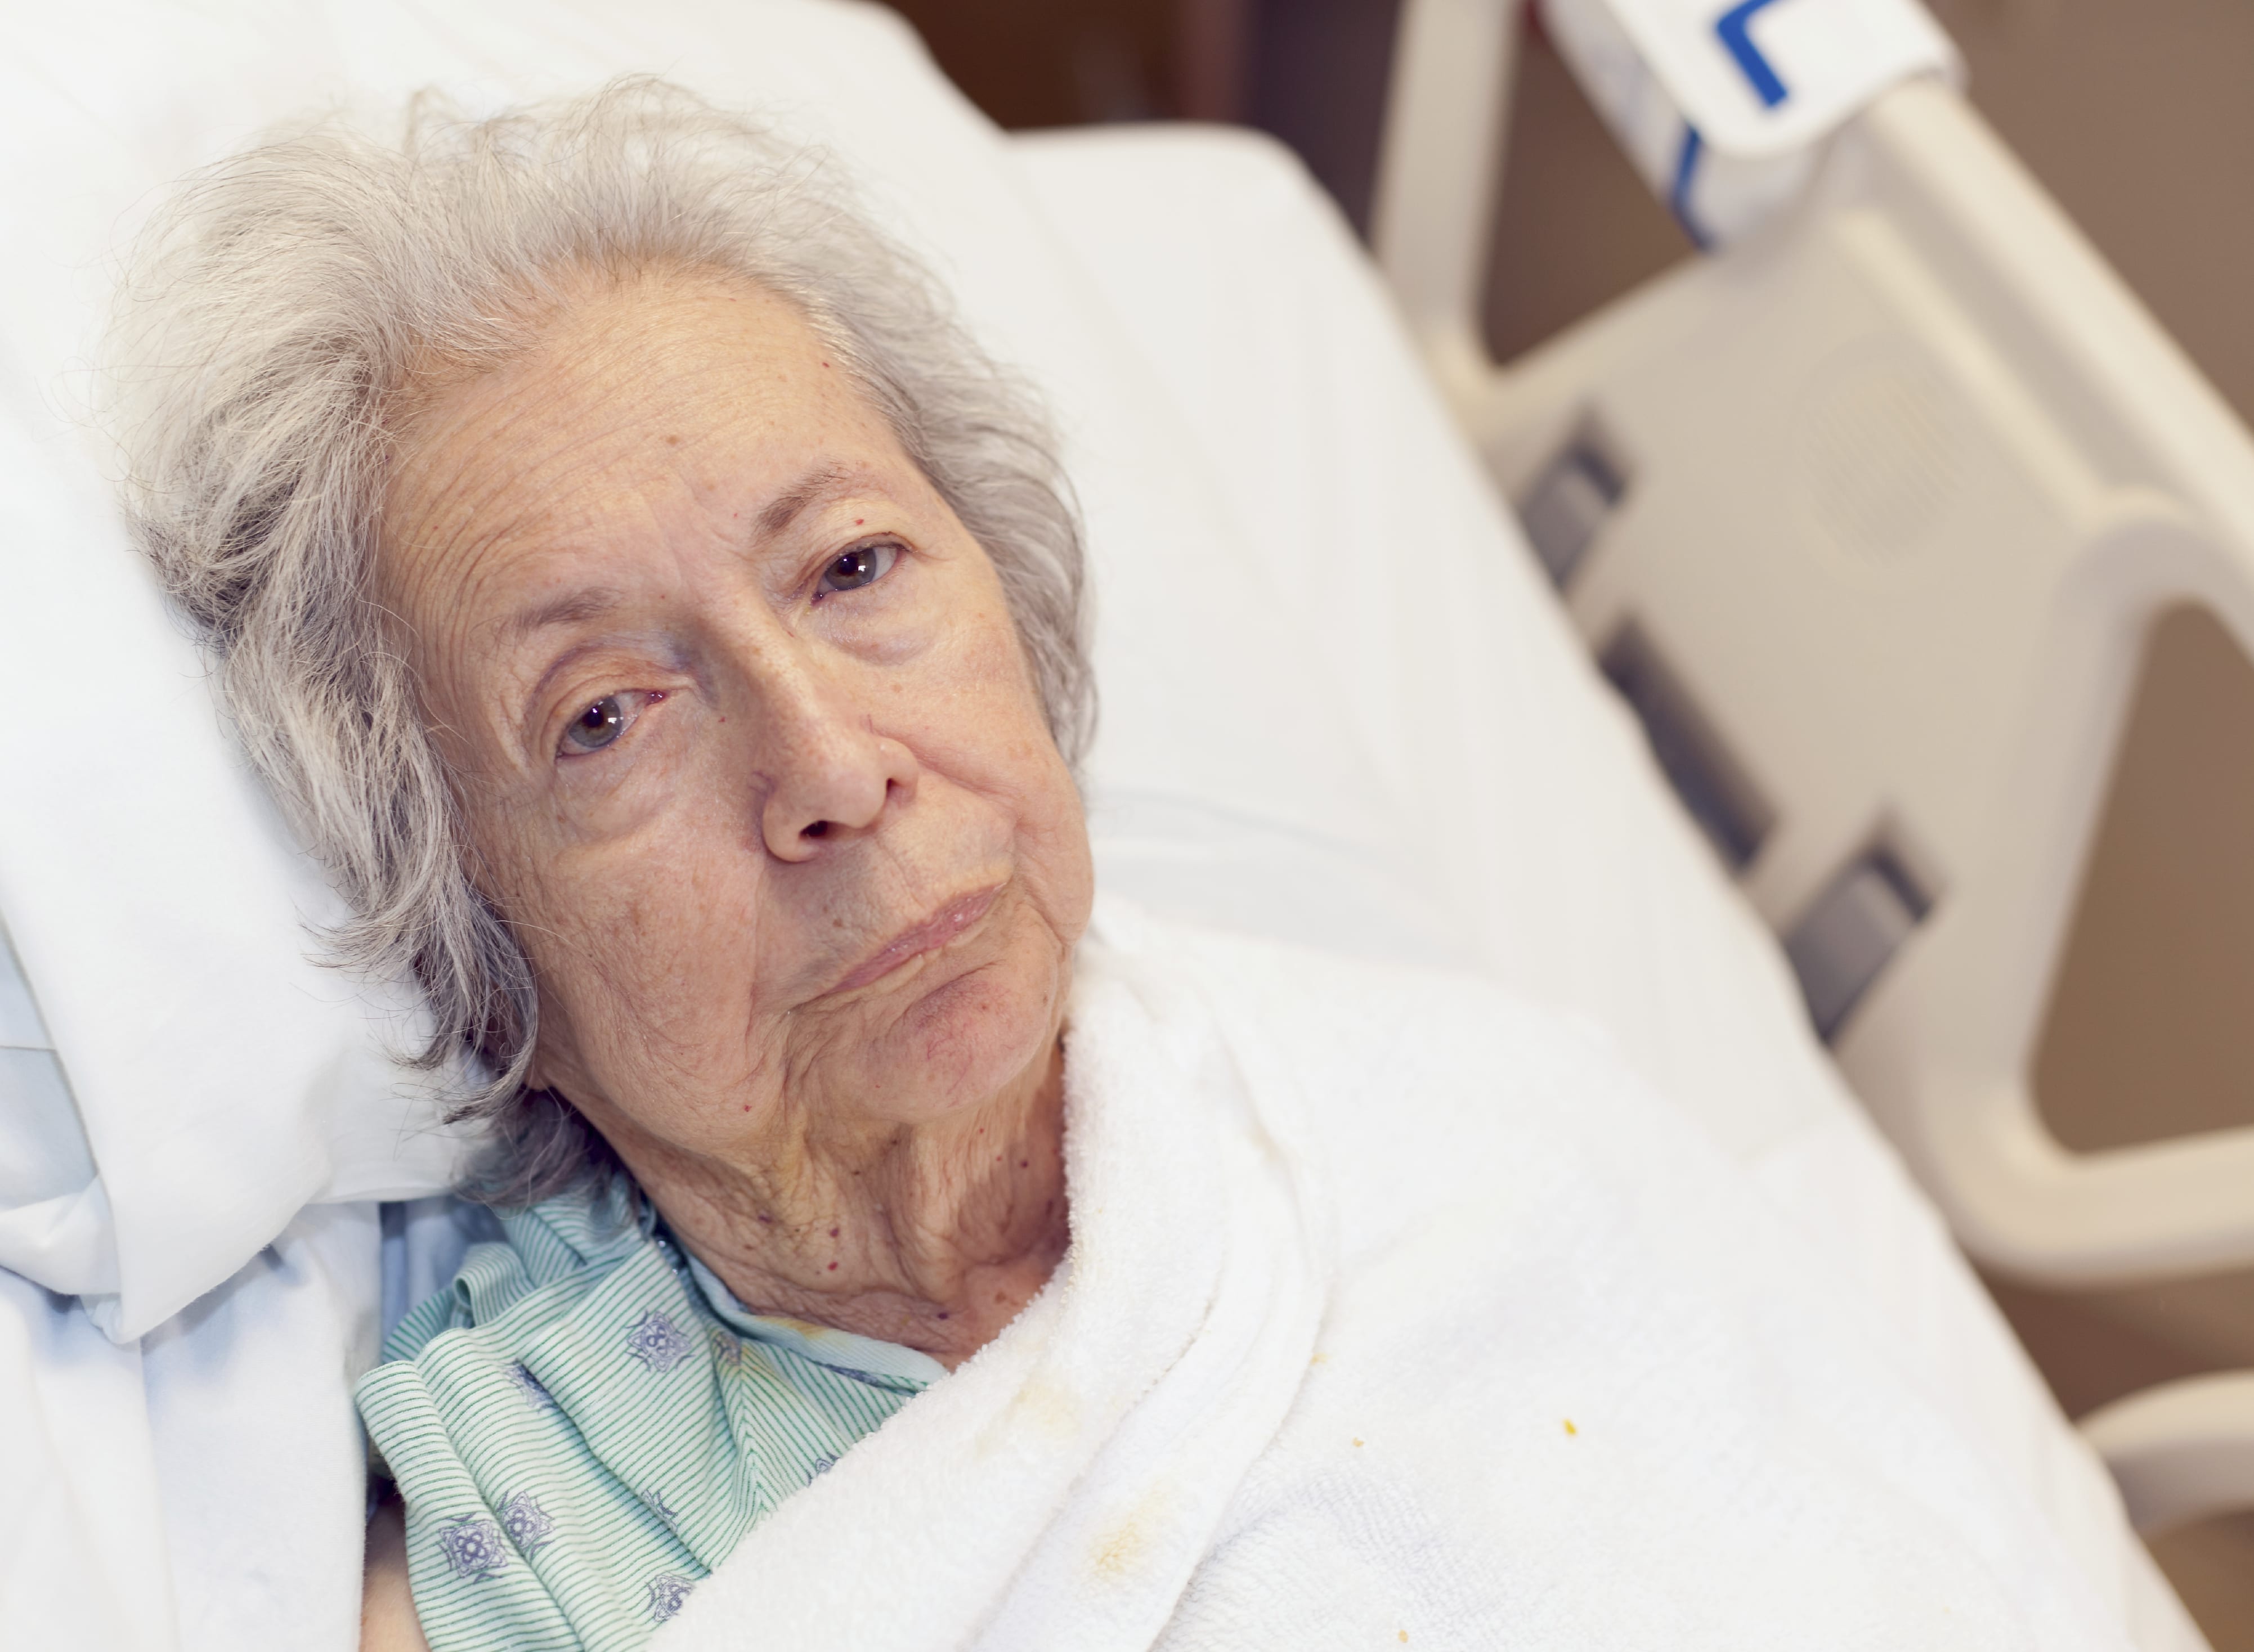 Reporting a Nursing Home Complaint in Maryland? Don't Bother